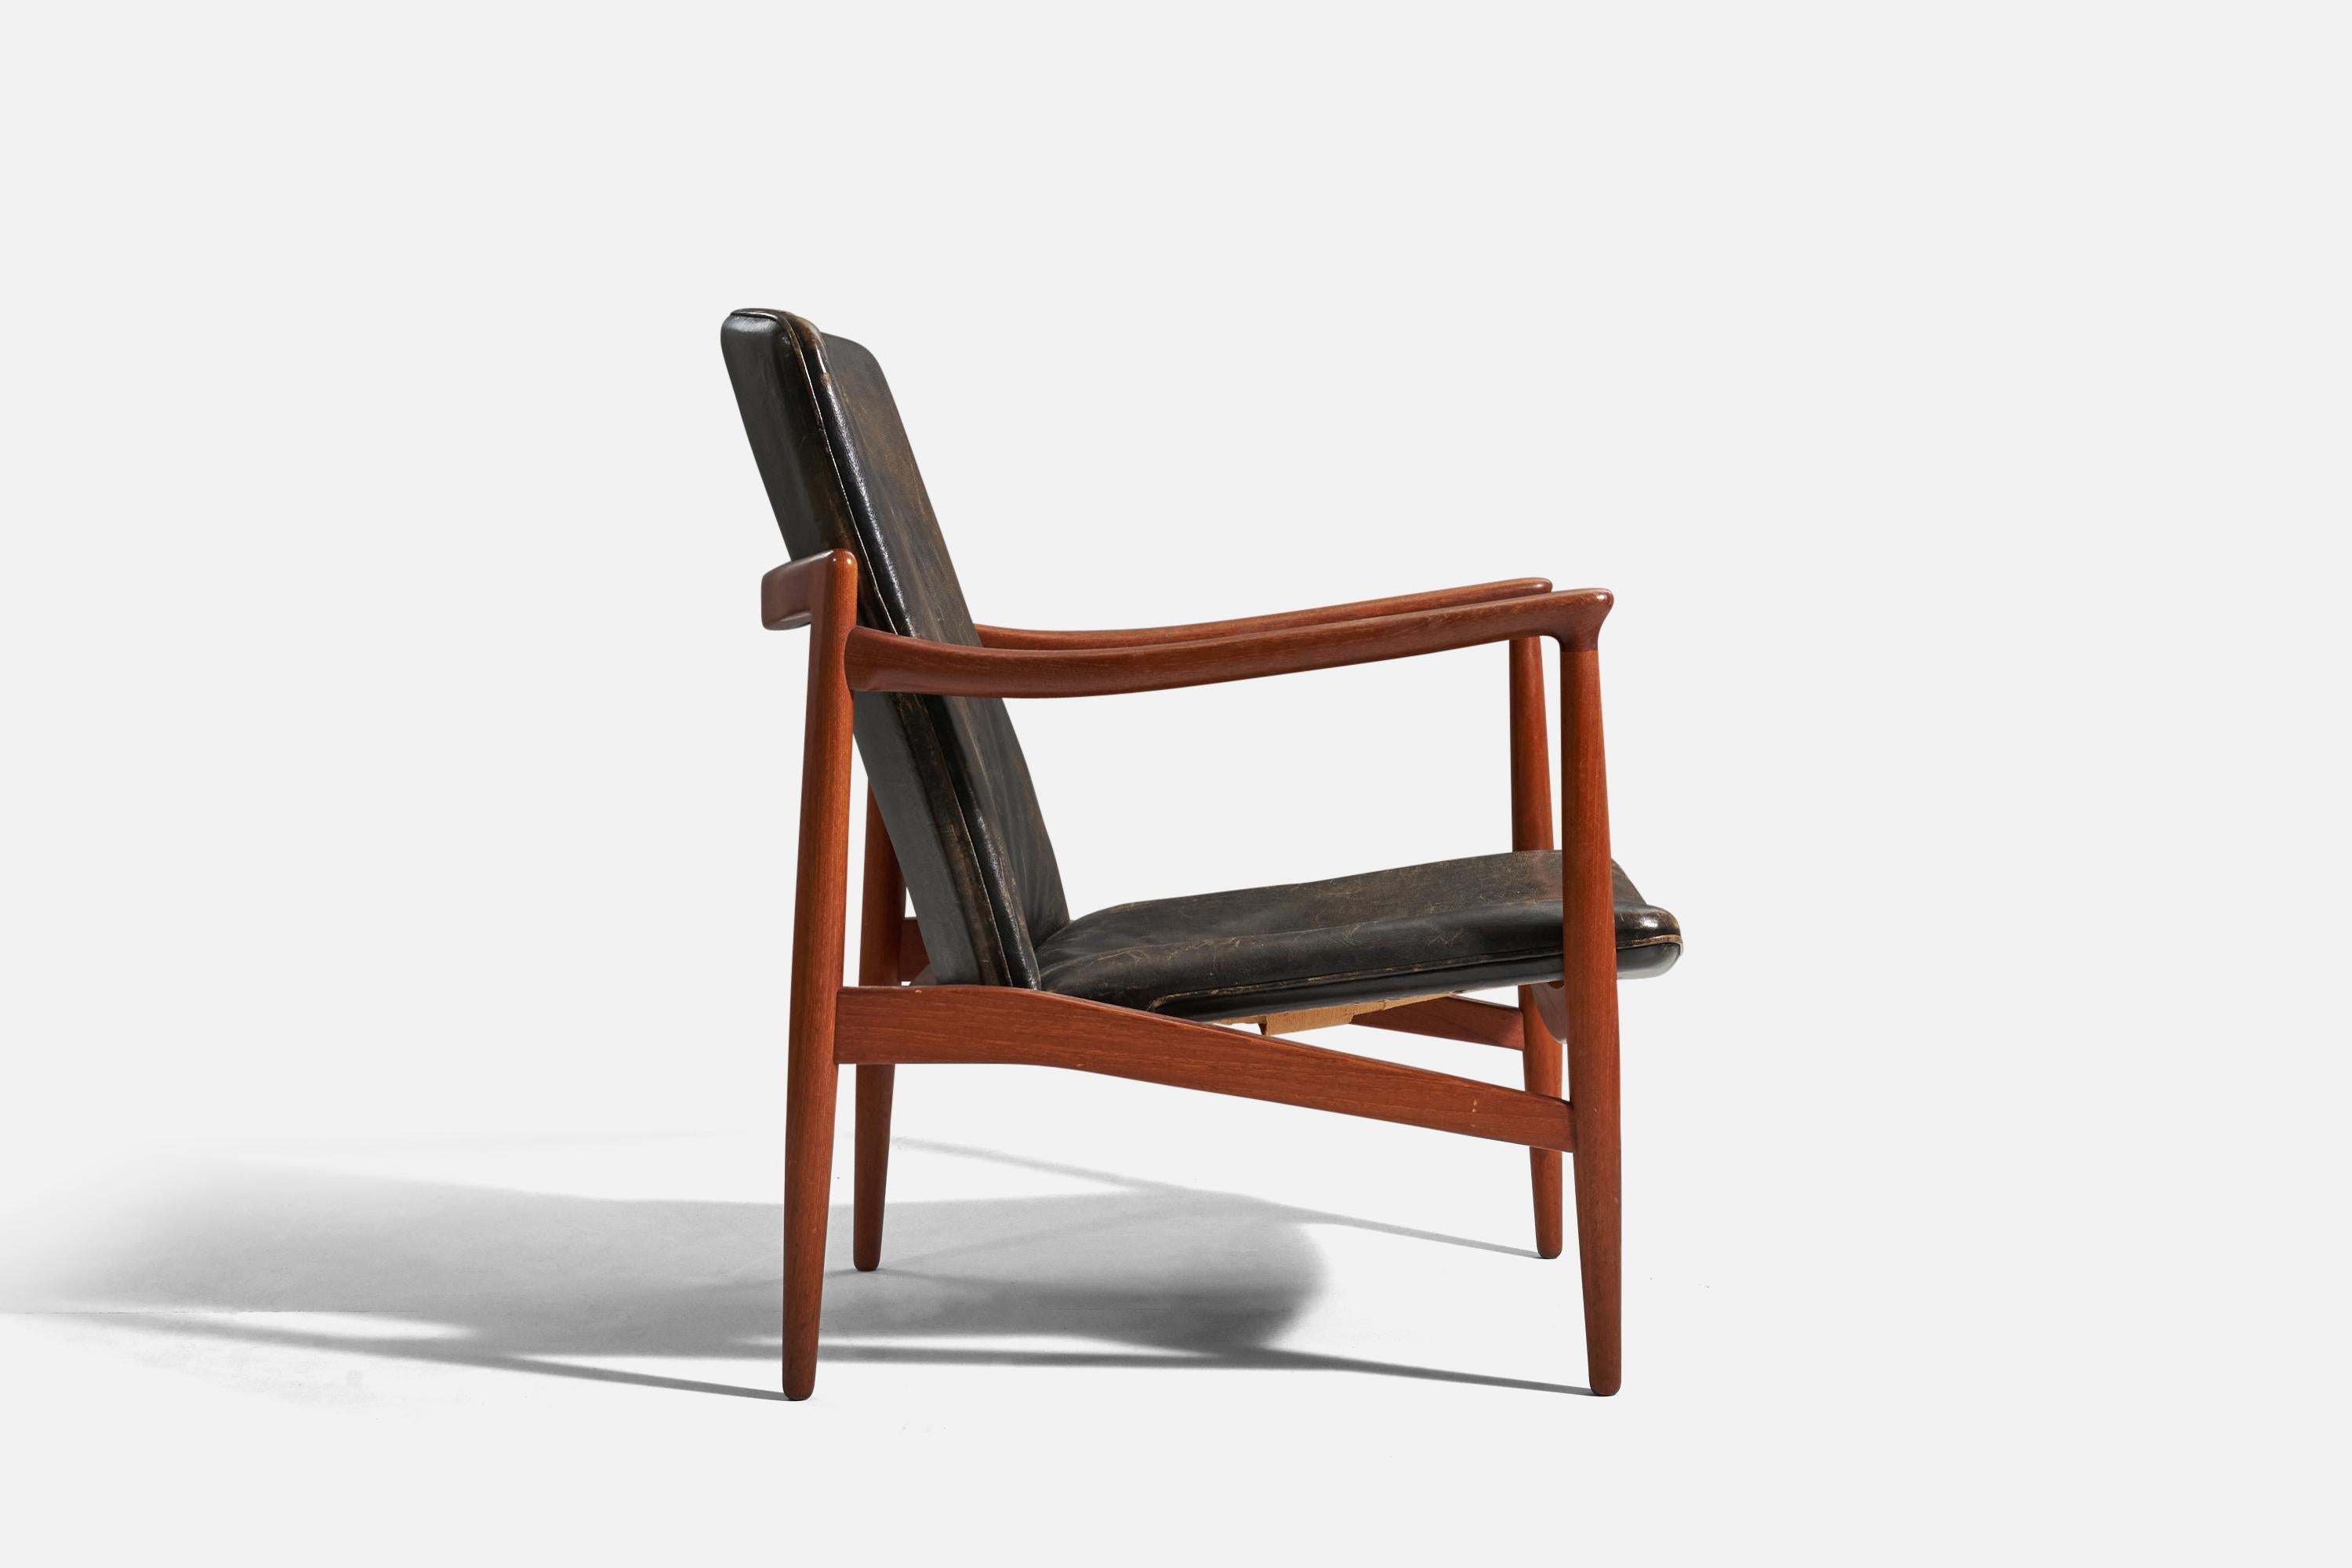 Jacob Kjaer, Adjustable Lounge Chair, Teak, Leather, Denmark, 1945 In Good Condition For Sale In High Point, NC